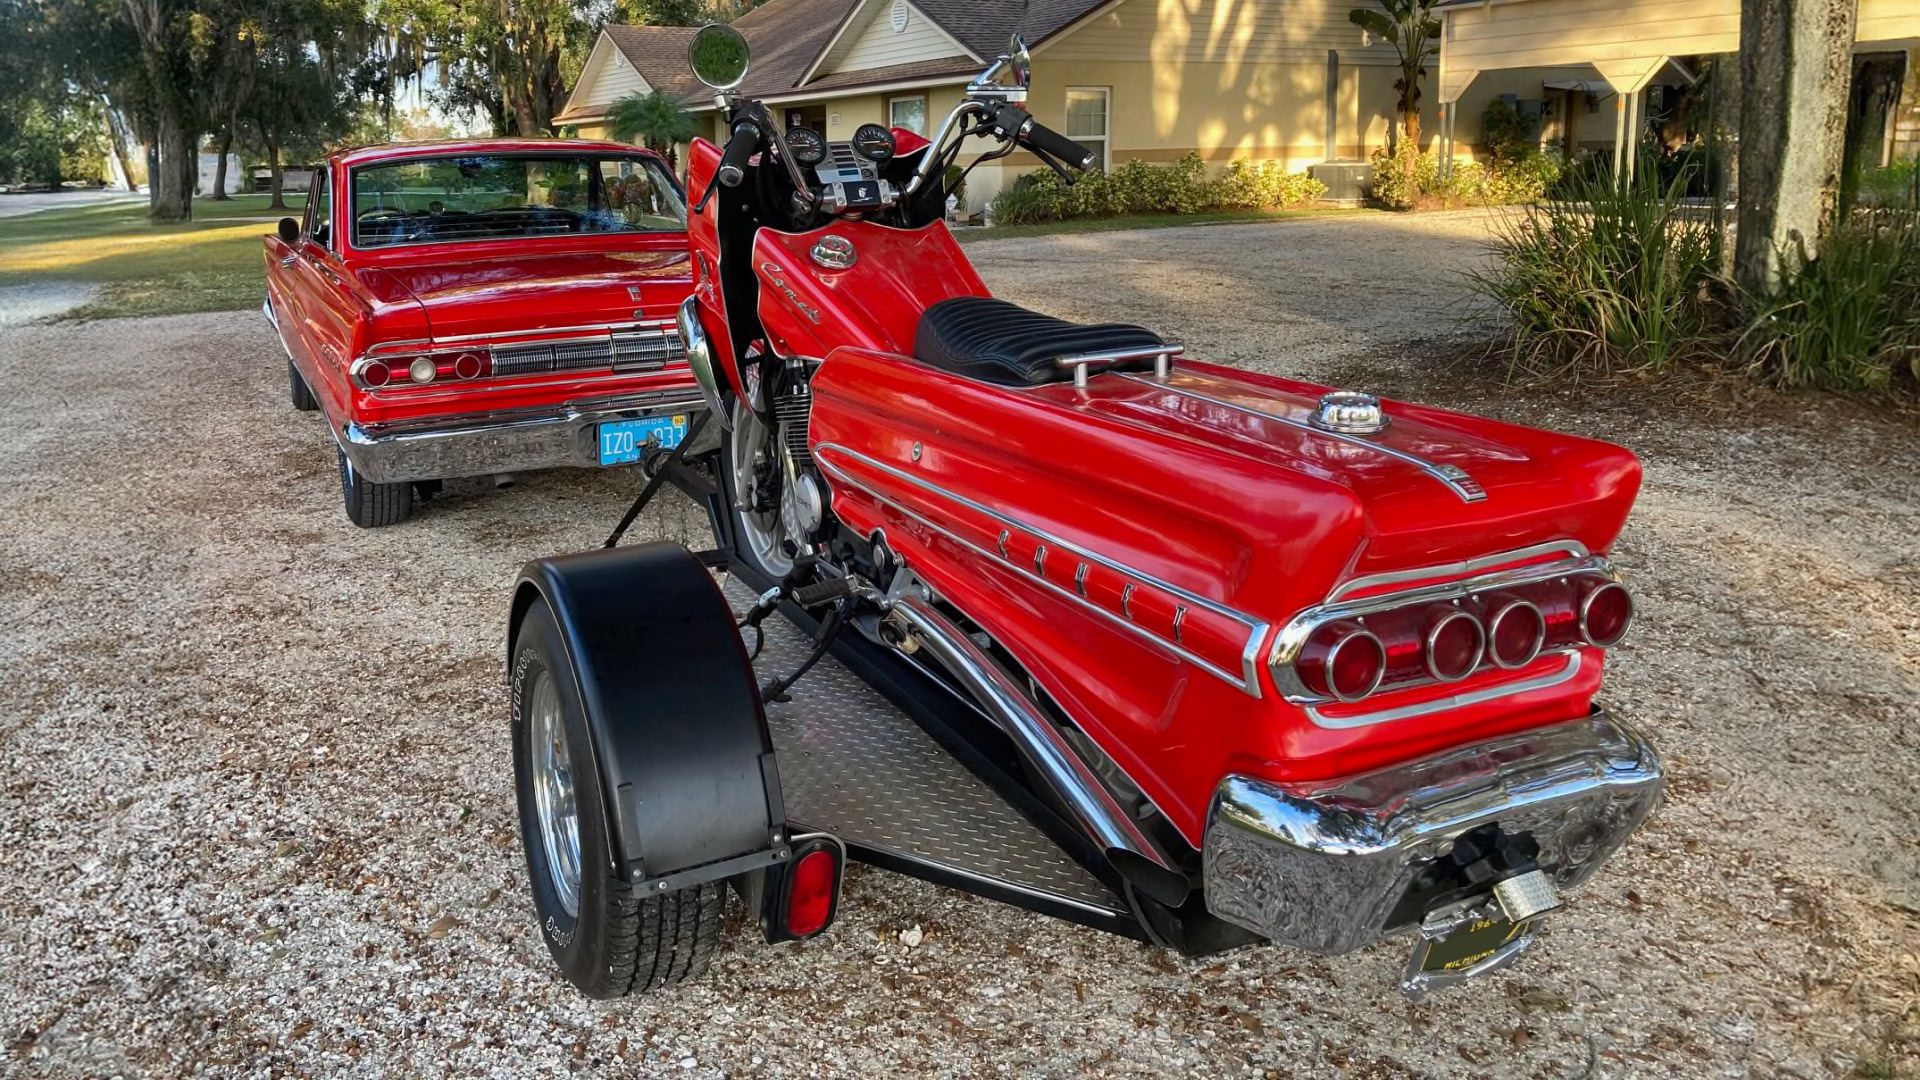 For Sale: A 1964 Mercury Comet Cyclone + Matching Motorcycle